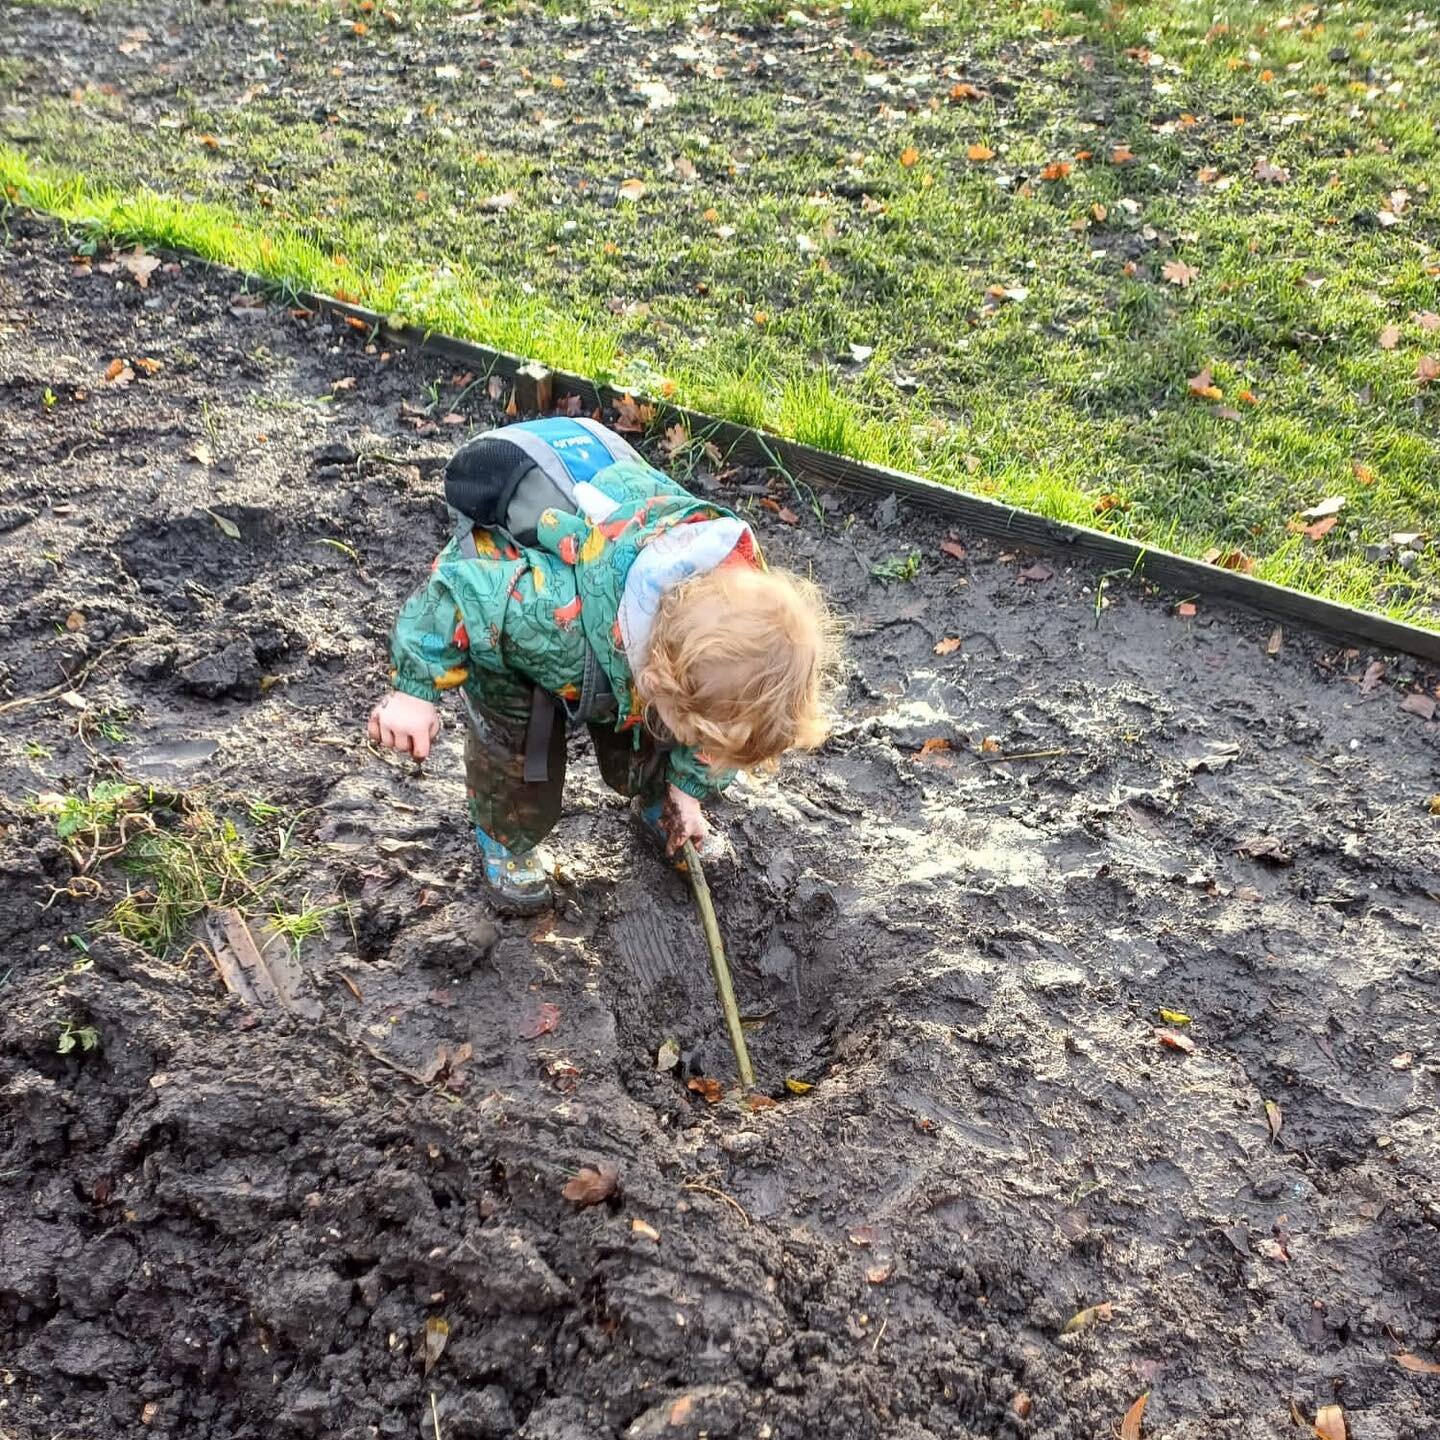 When life gives you mud...roll in it! ⏩

We've come to the end of the first term of #space2play and it's been brilliant inviting our new explorers to the garden. They have foraged for fruit, toasted crumpets, explored every inch of the acre, played i